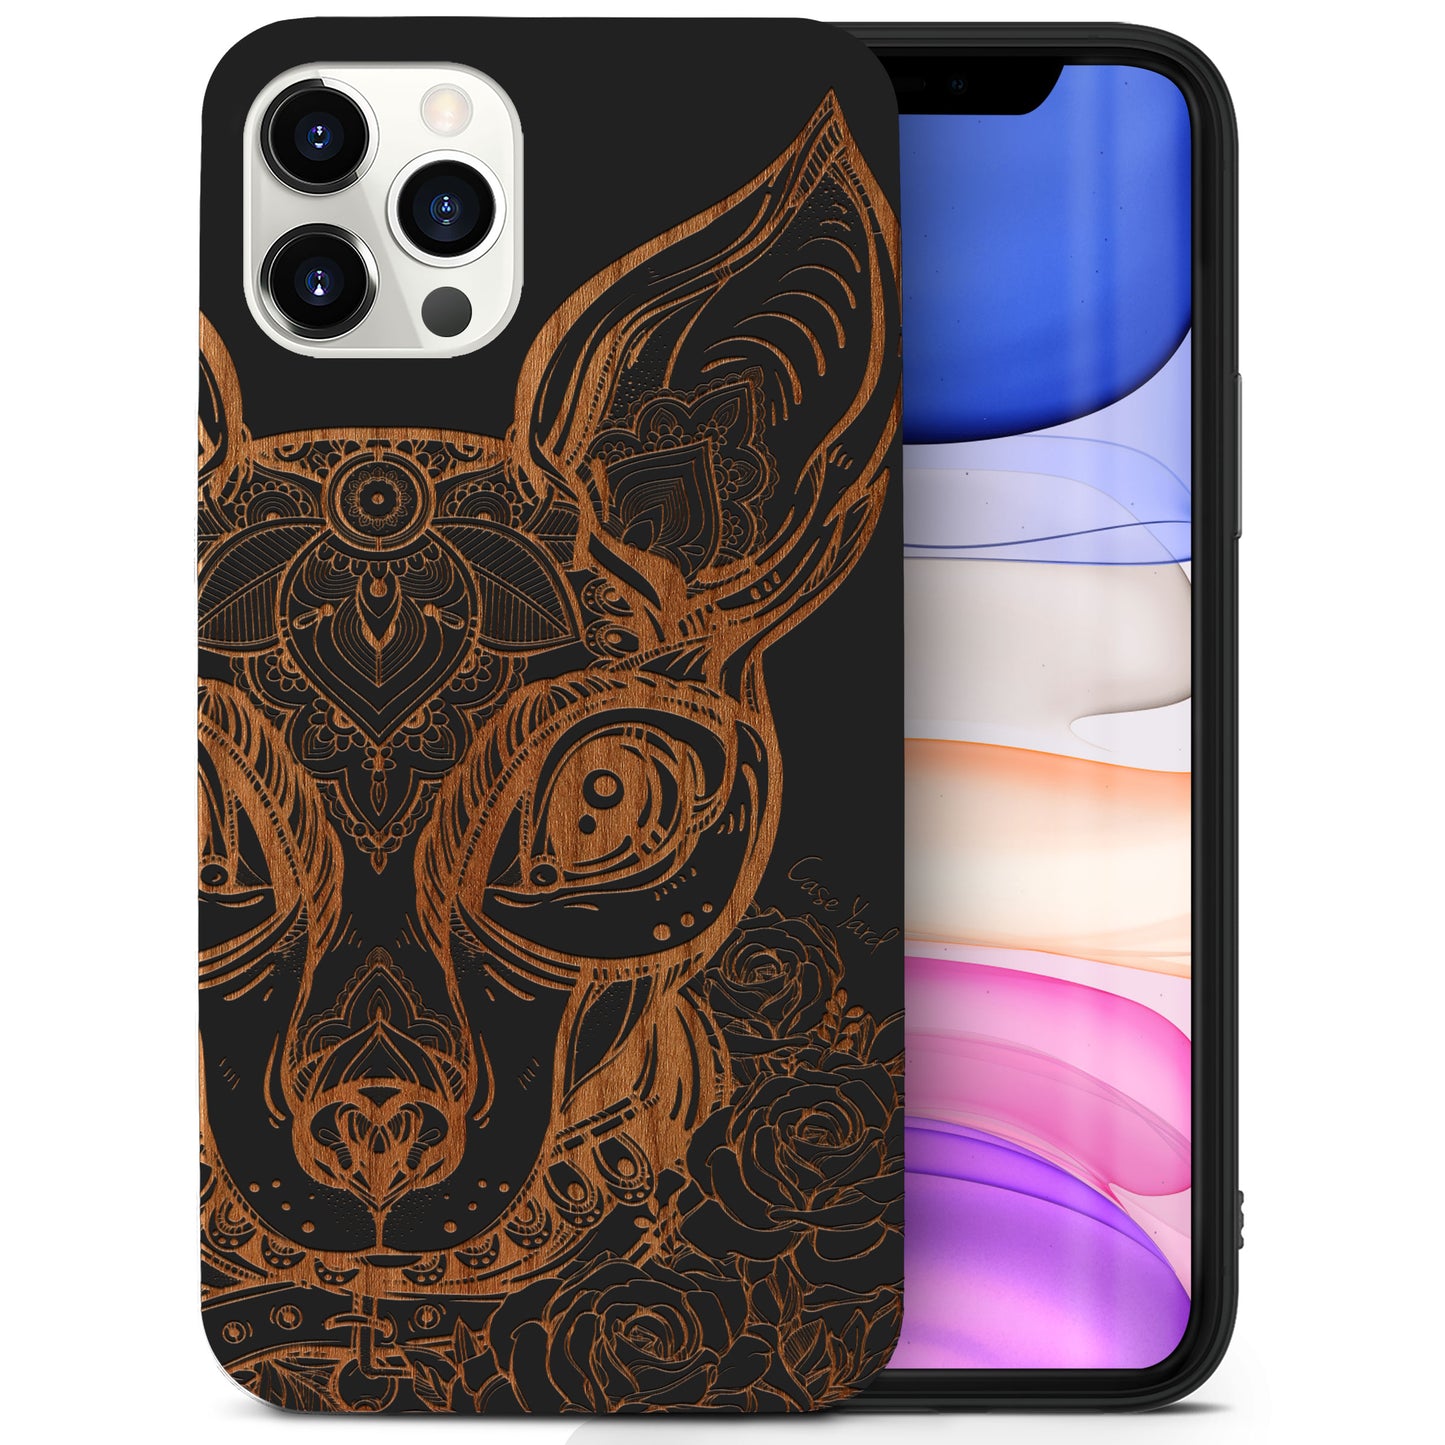 Wooden Cell Phone Case Cover, Laser Engraved case for iPhone & Samsung phone Chihuahua Design